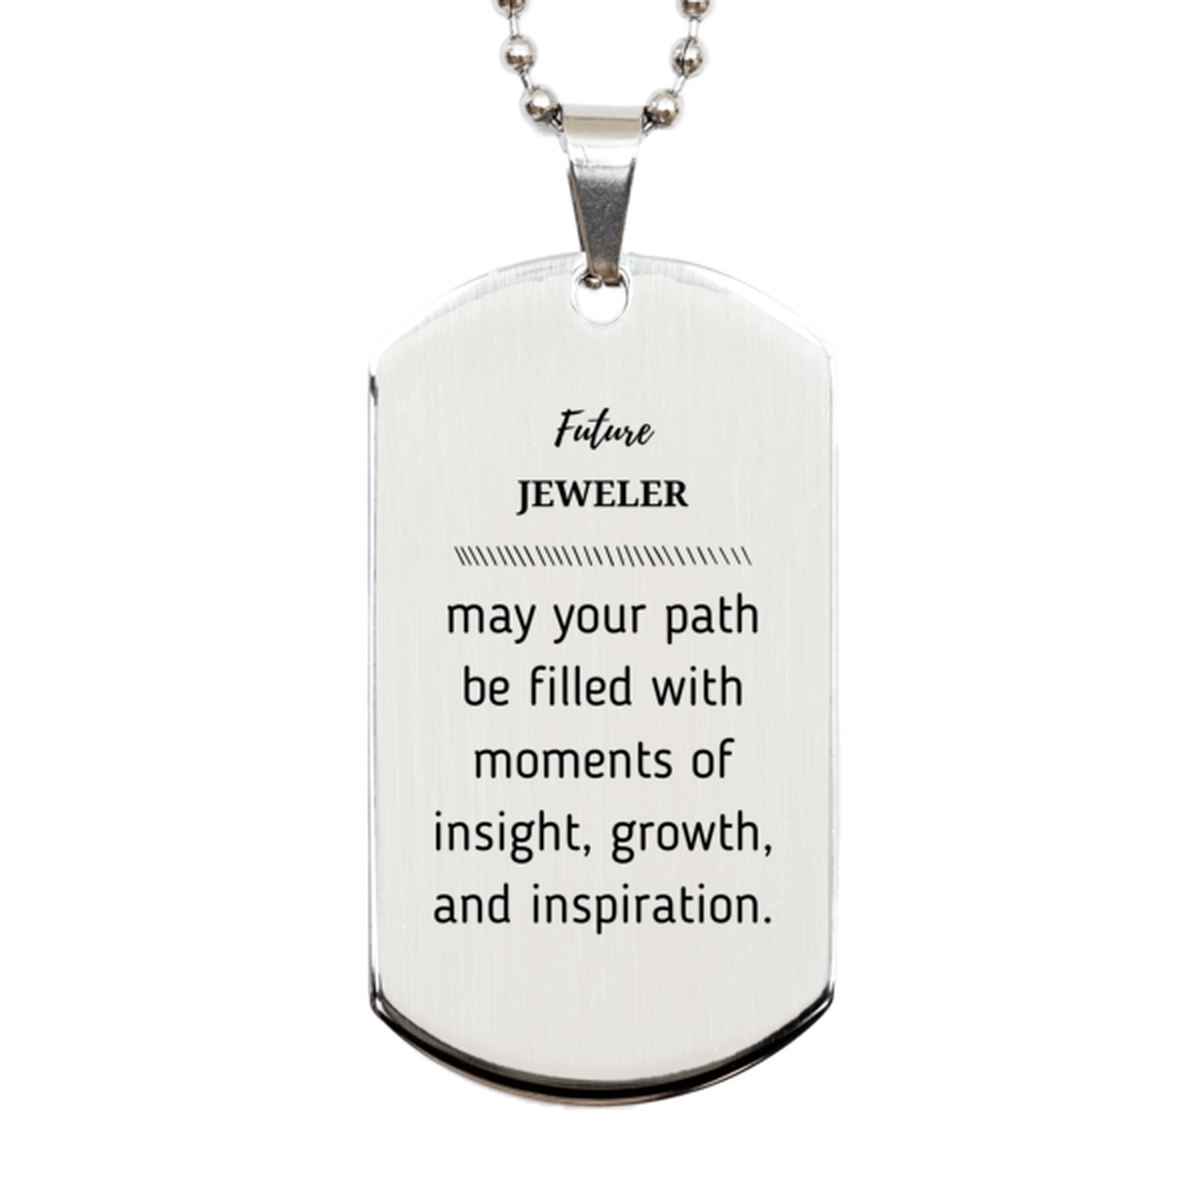 Future Jeweler Gifts, May your path be filled with moments of insight, Graduation Gifts for New Jeweler, Christmas Unique Silver Dog Tag For Men, Women, Friends